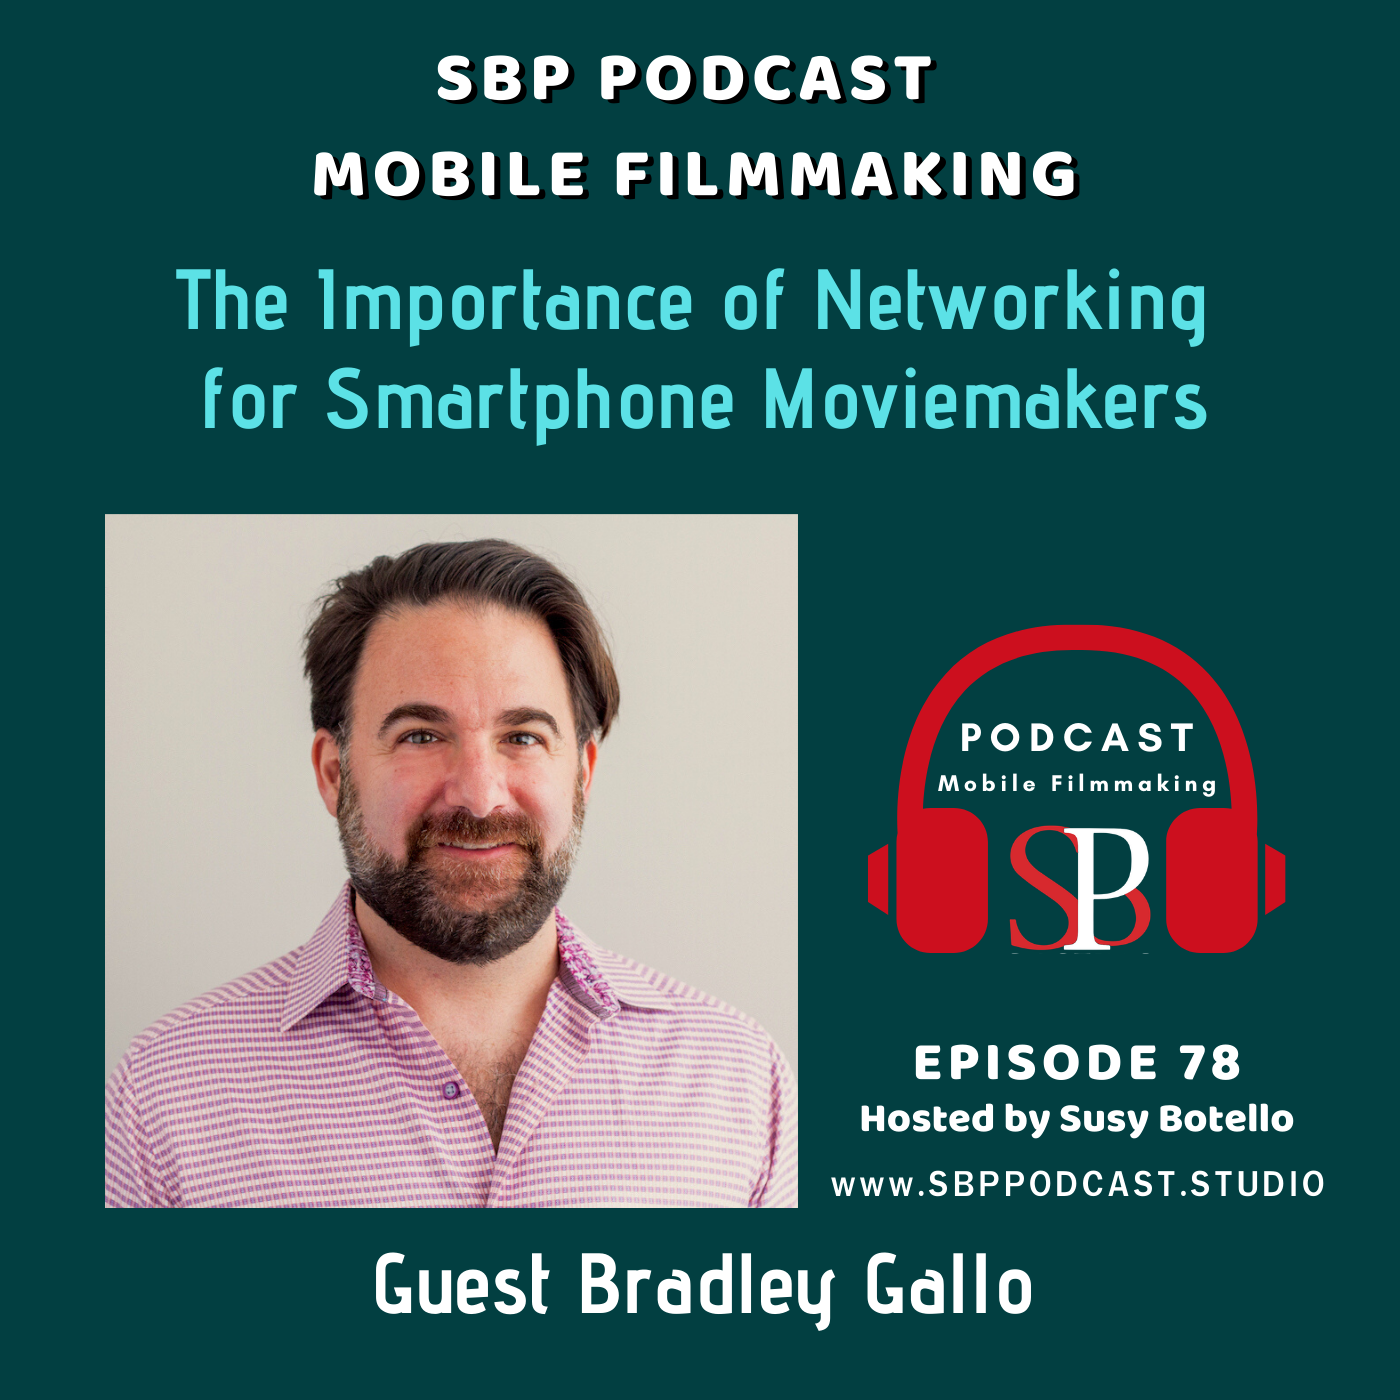 The Importance of Networking for Smartphone Moviemakers with Bradley Gallo